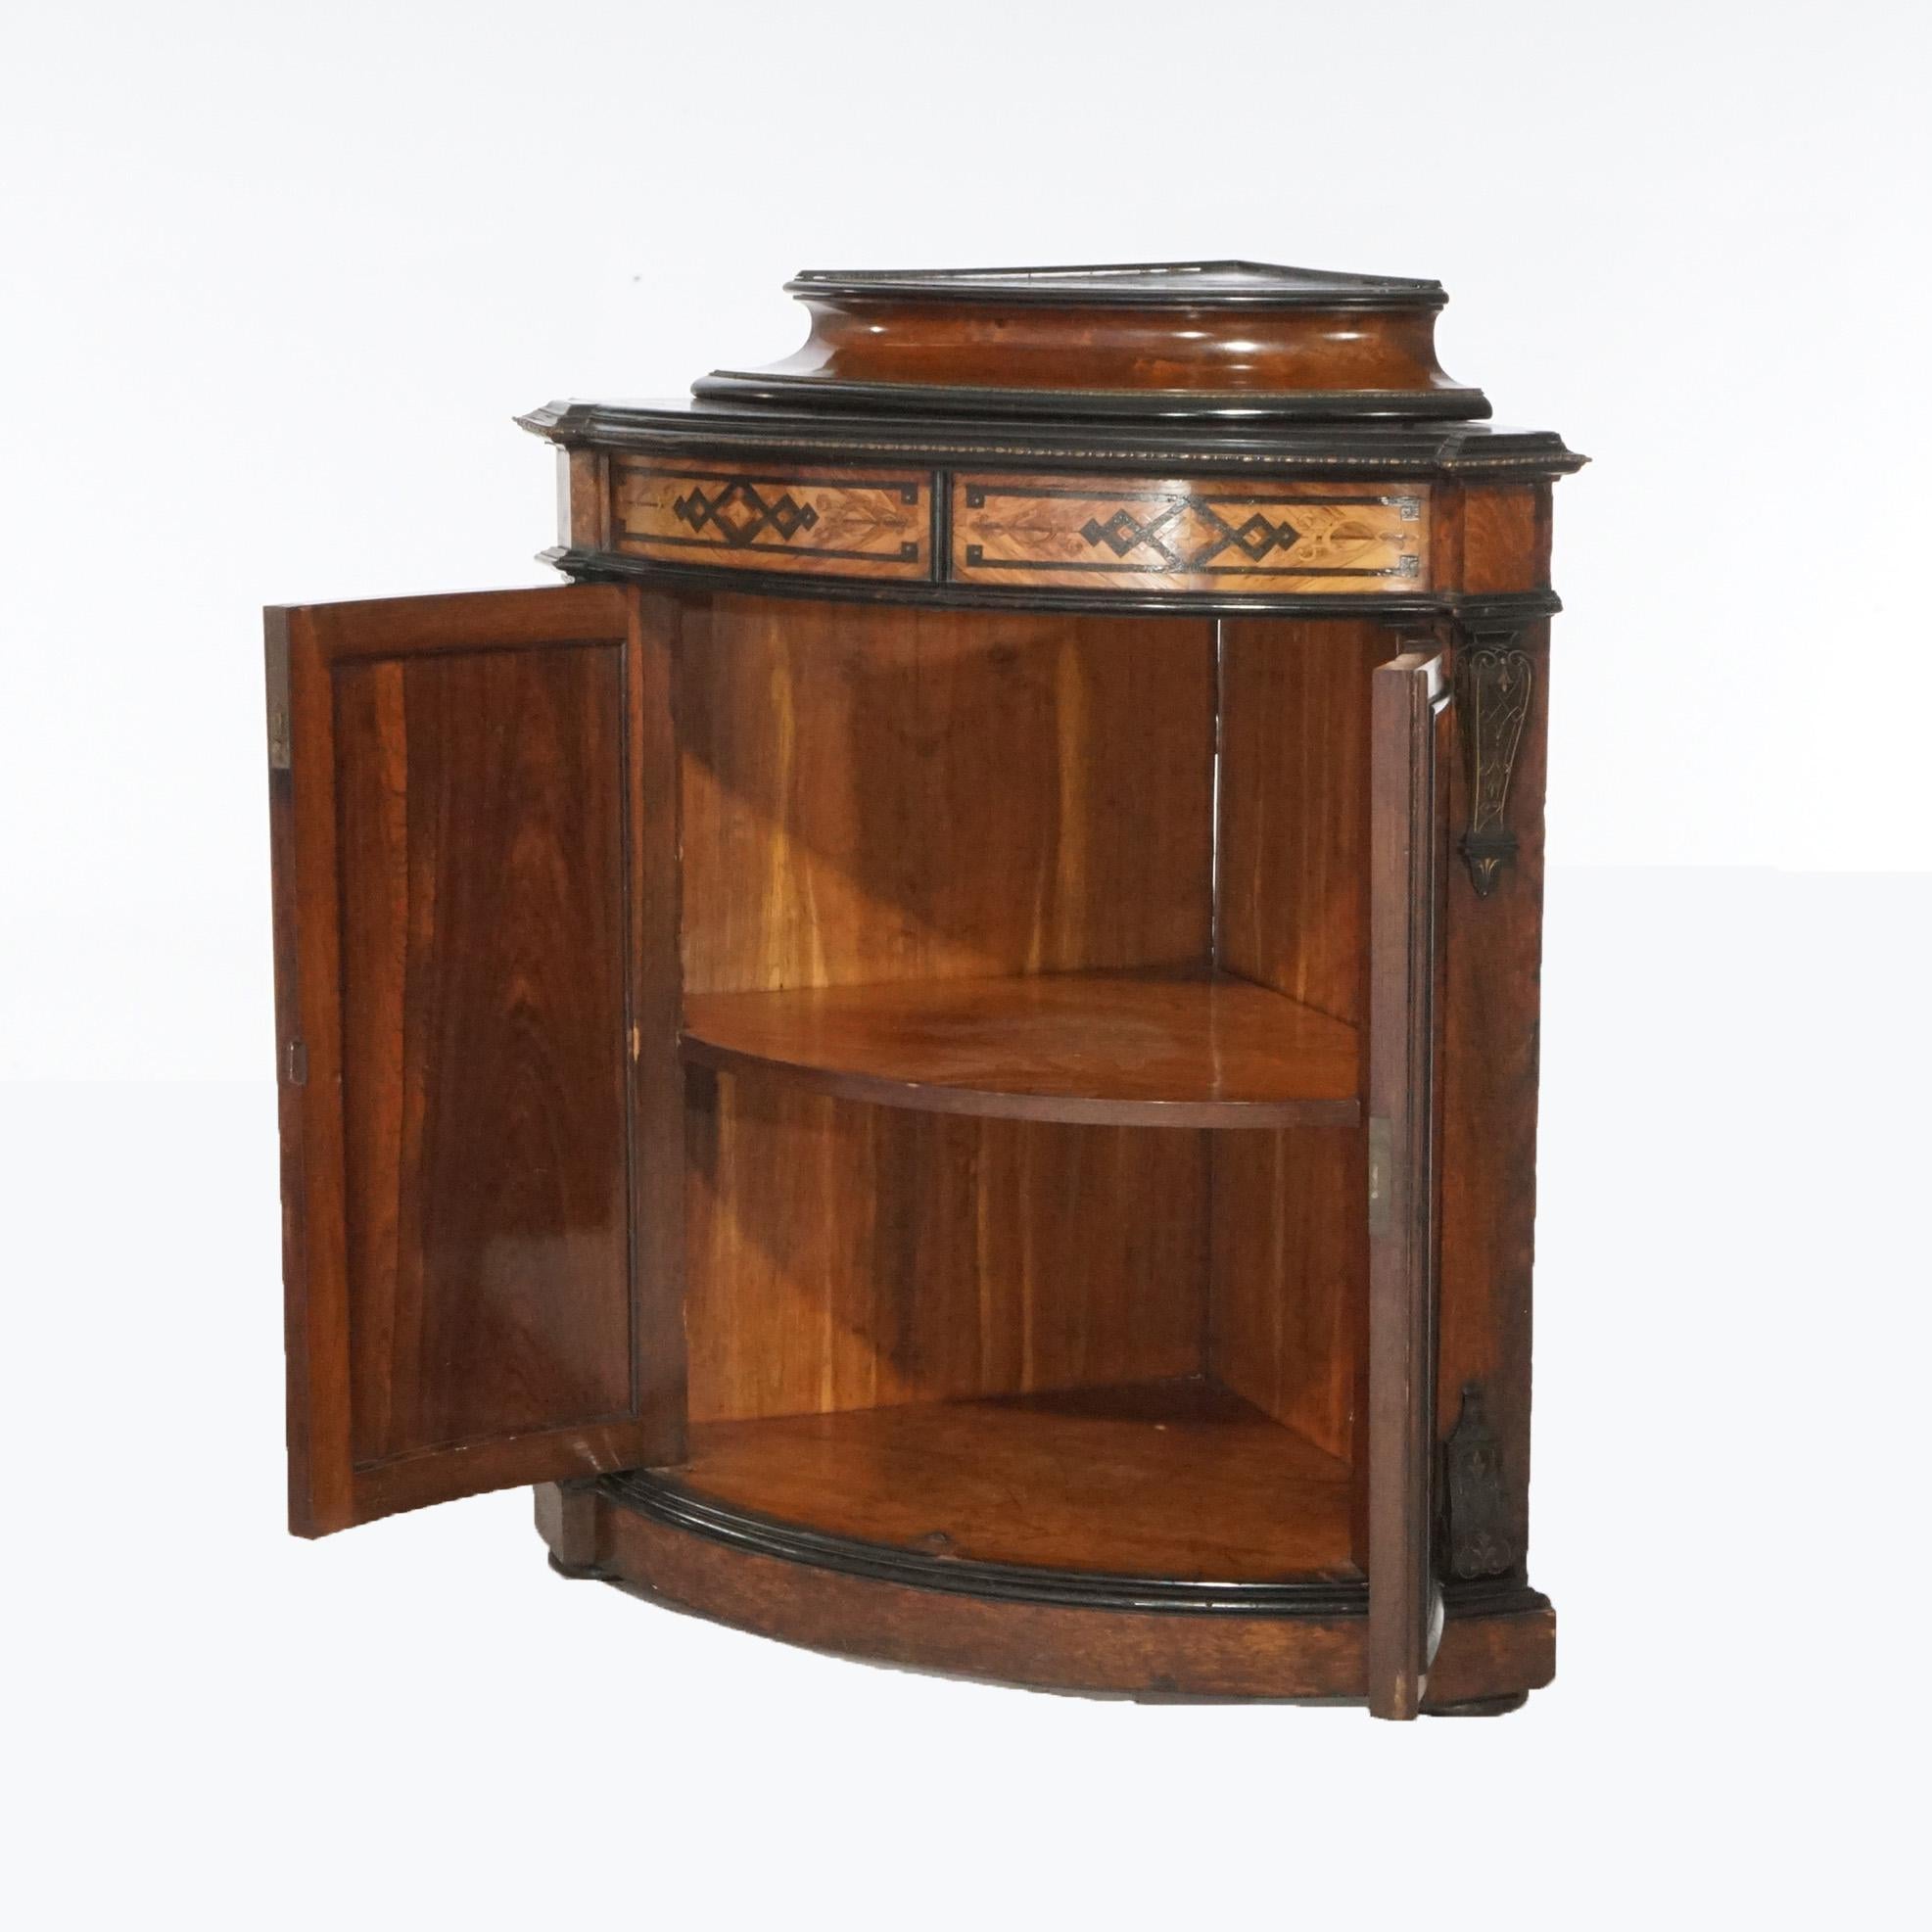 Inlay Antique Renaissance Revival Aesthetic Rosewood & Marquetry Corner Cabinet, C1880 For Sale